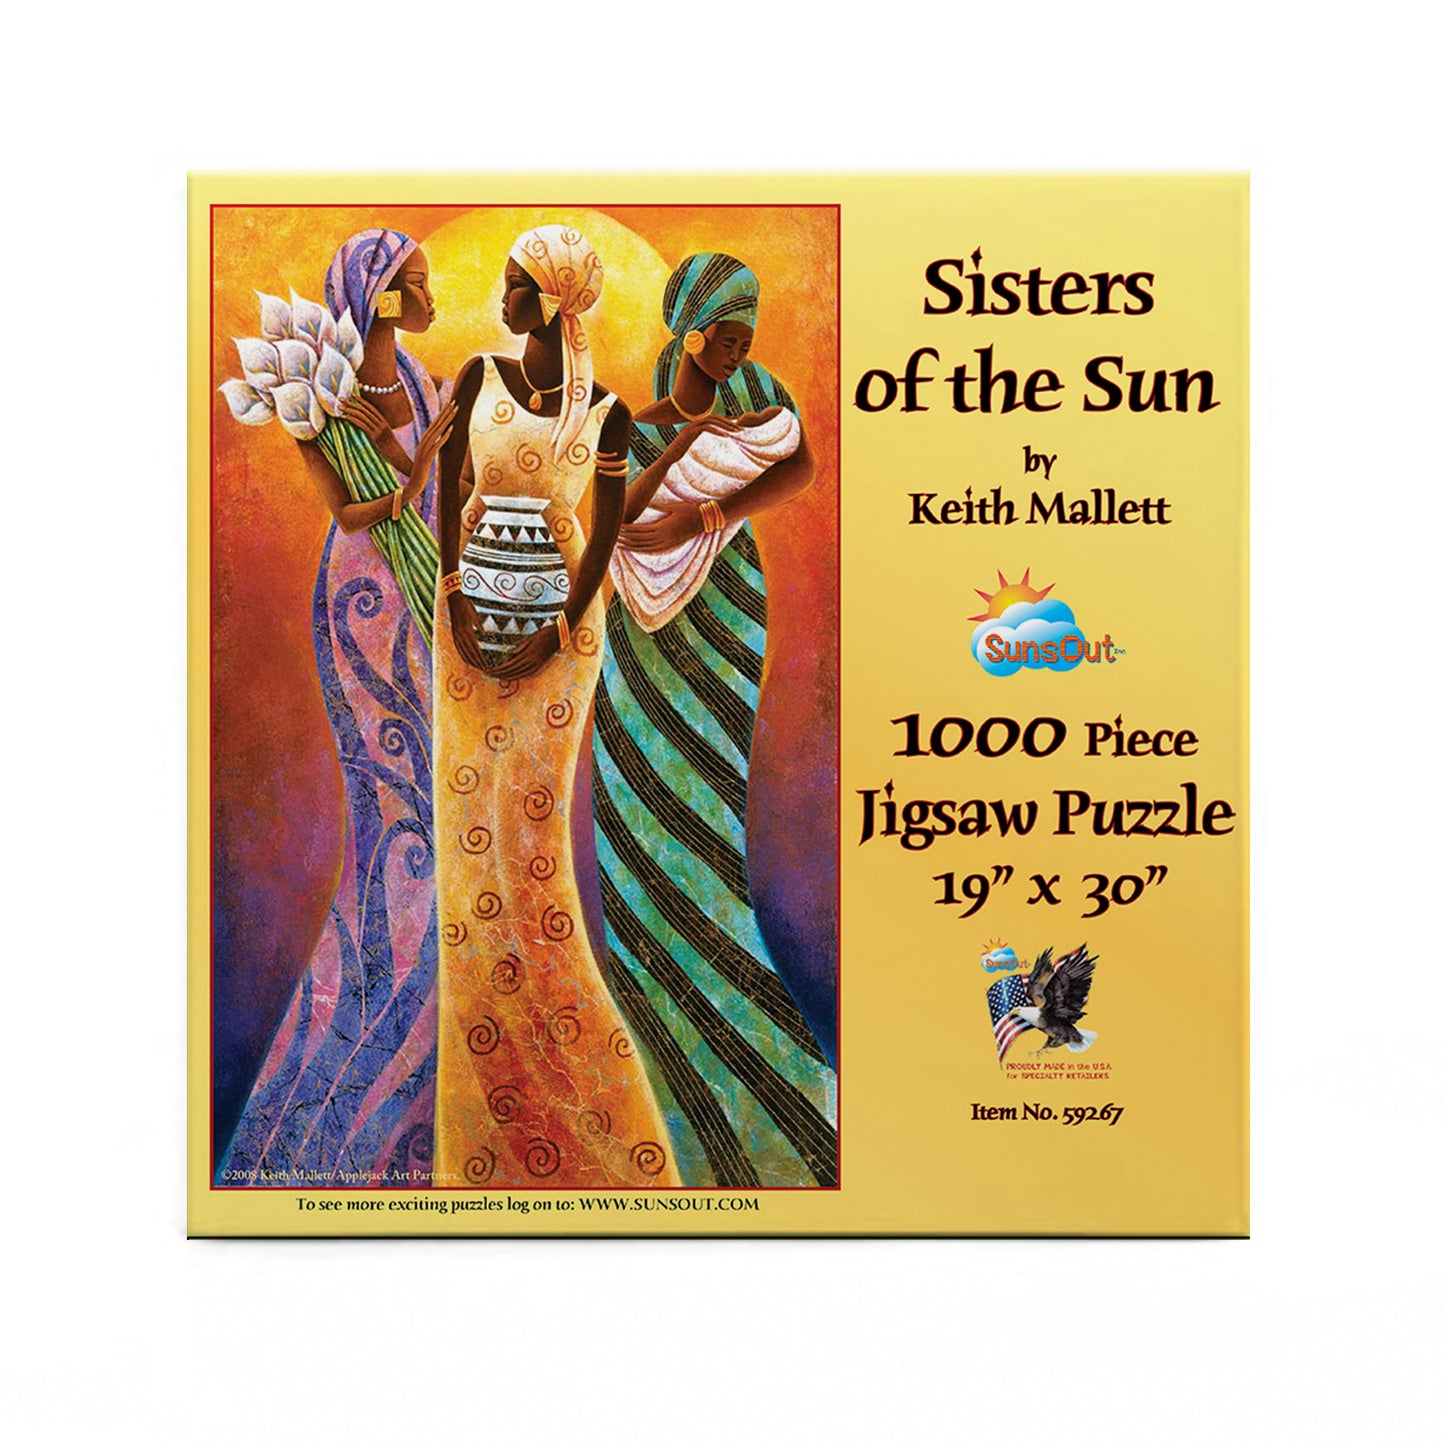 Sisters of the Sun - 1000 Piece Jigsaw Puzzle